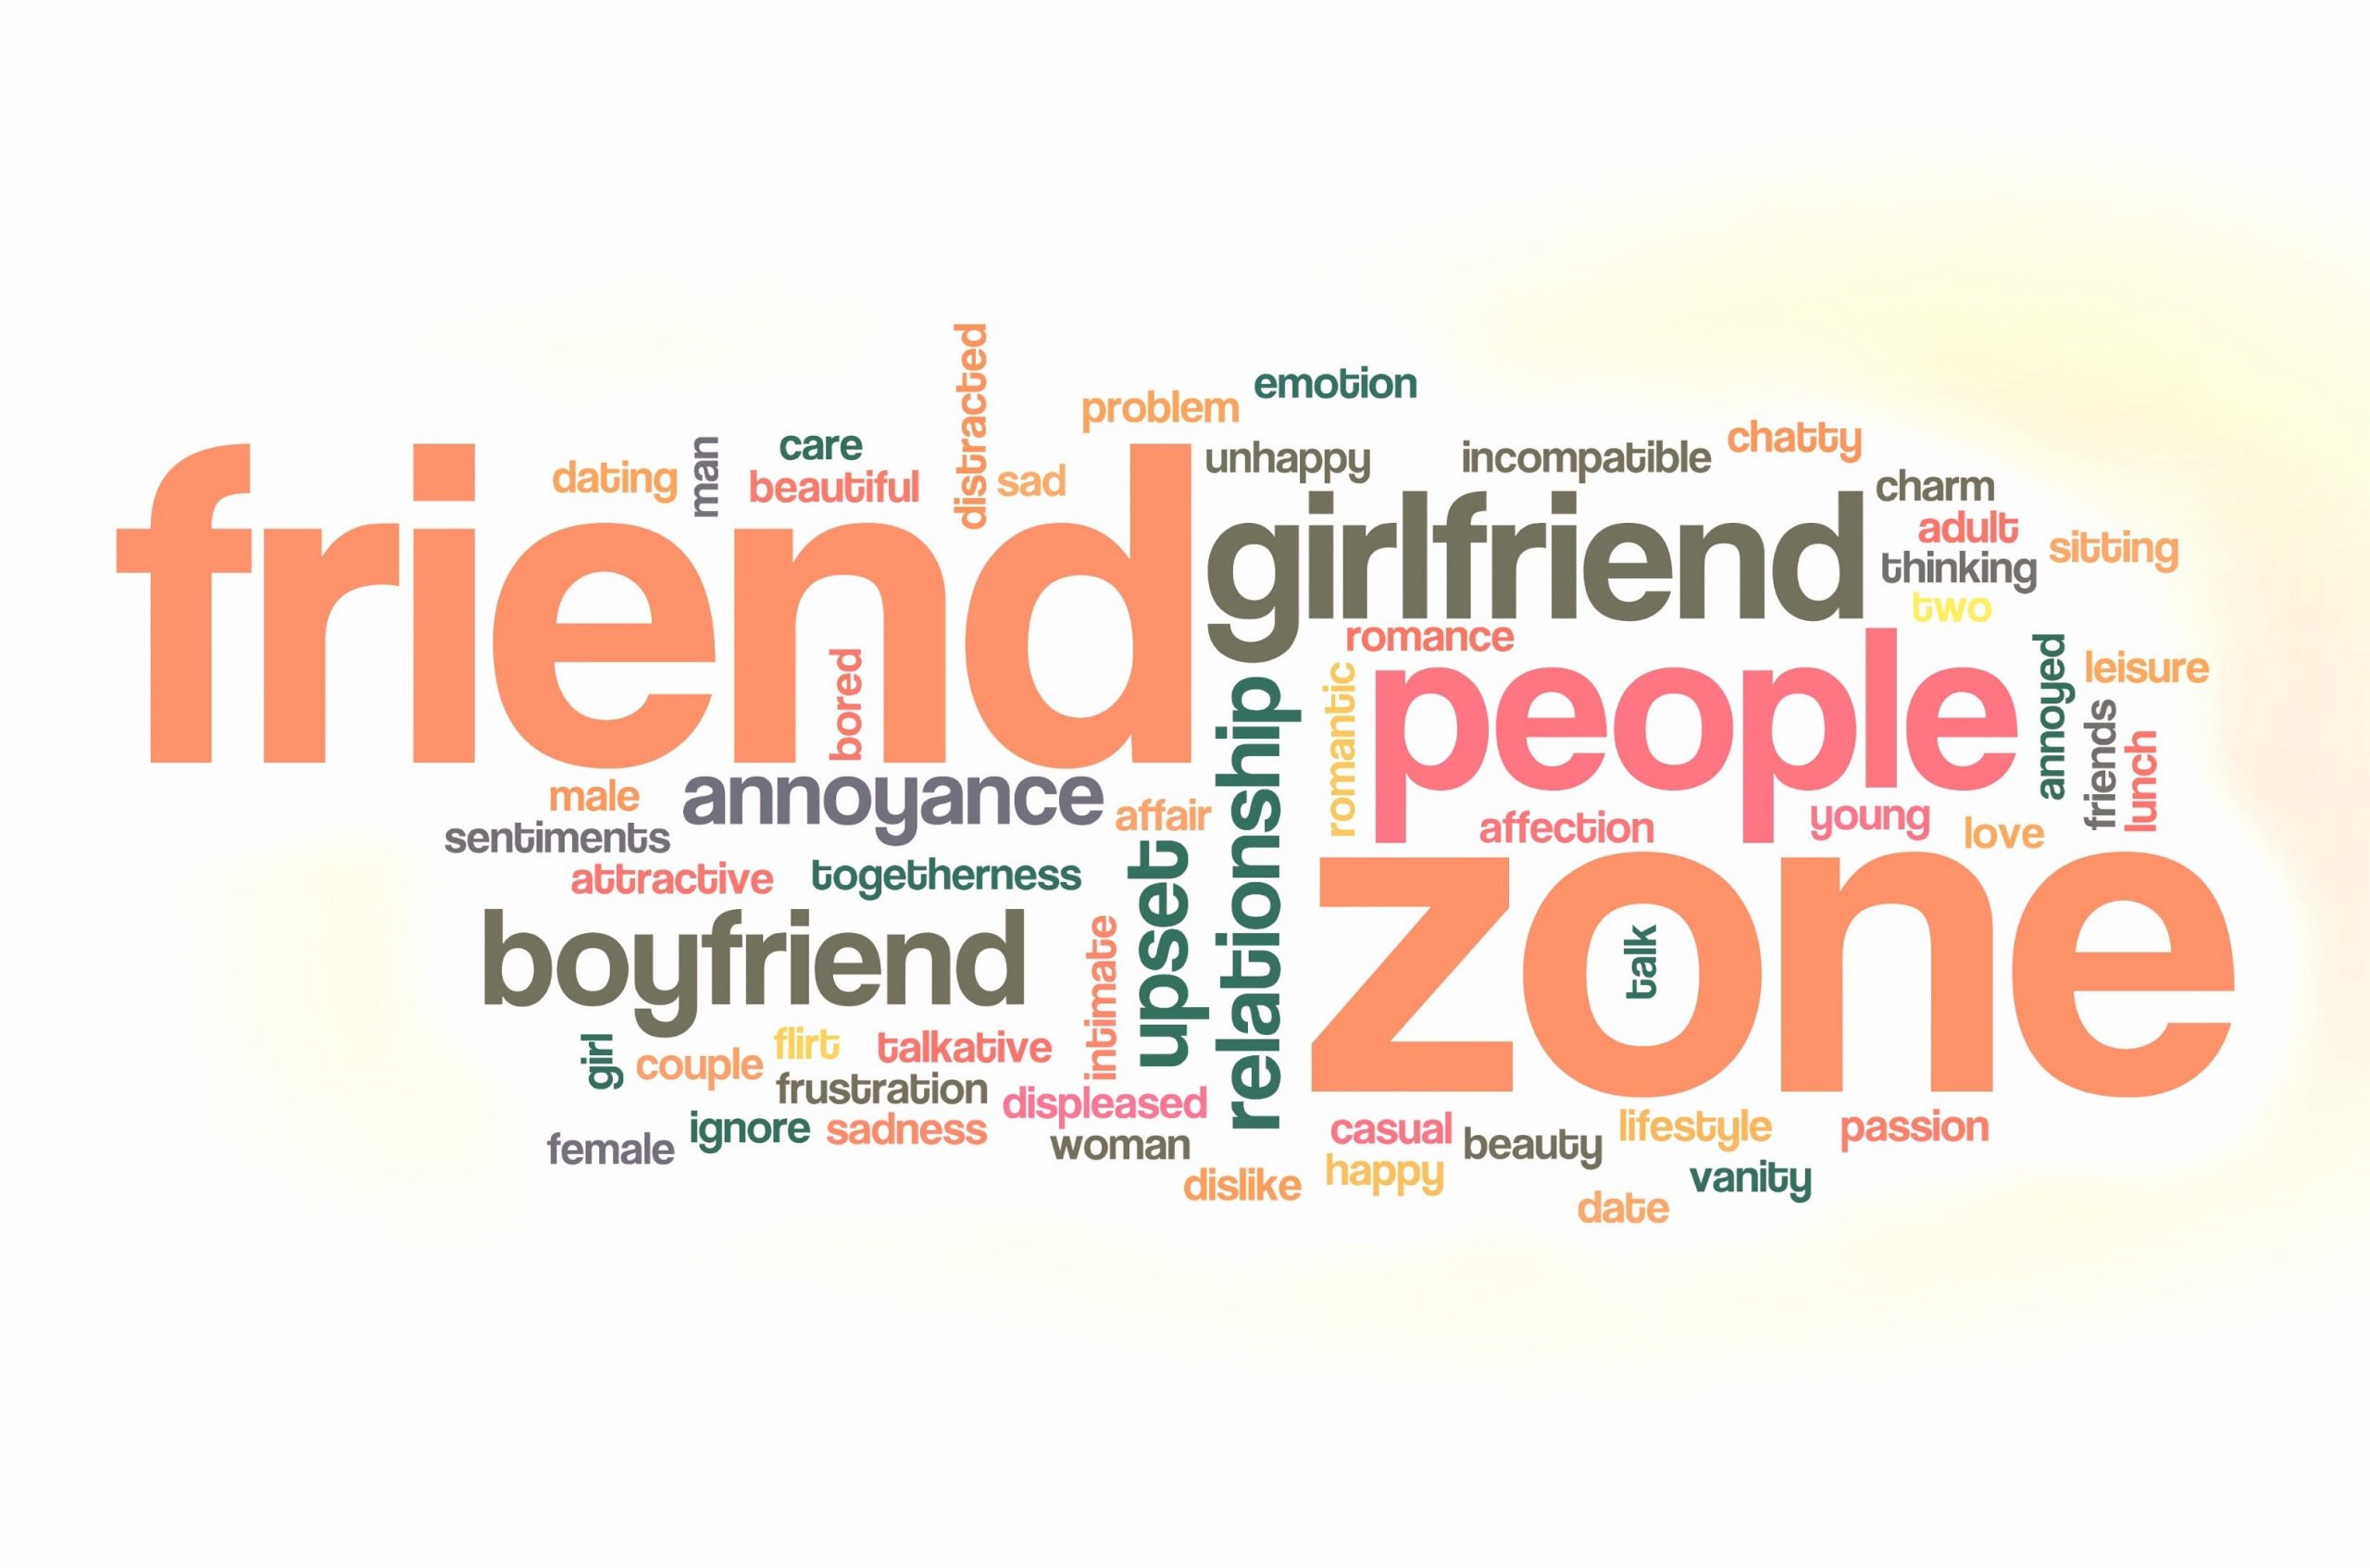 What does it mean to Friendzone a guy?